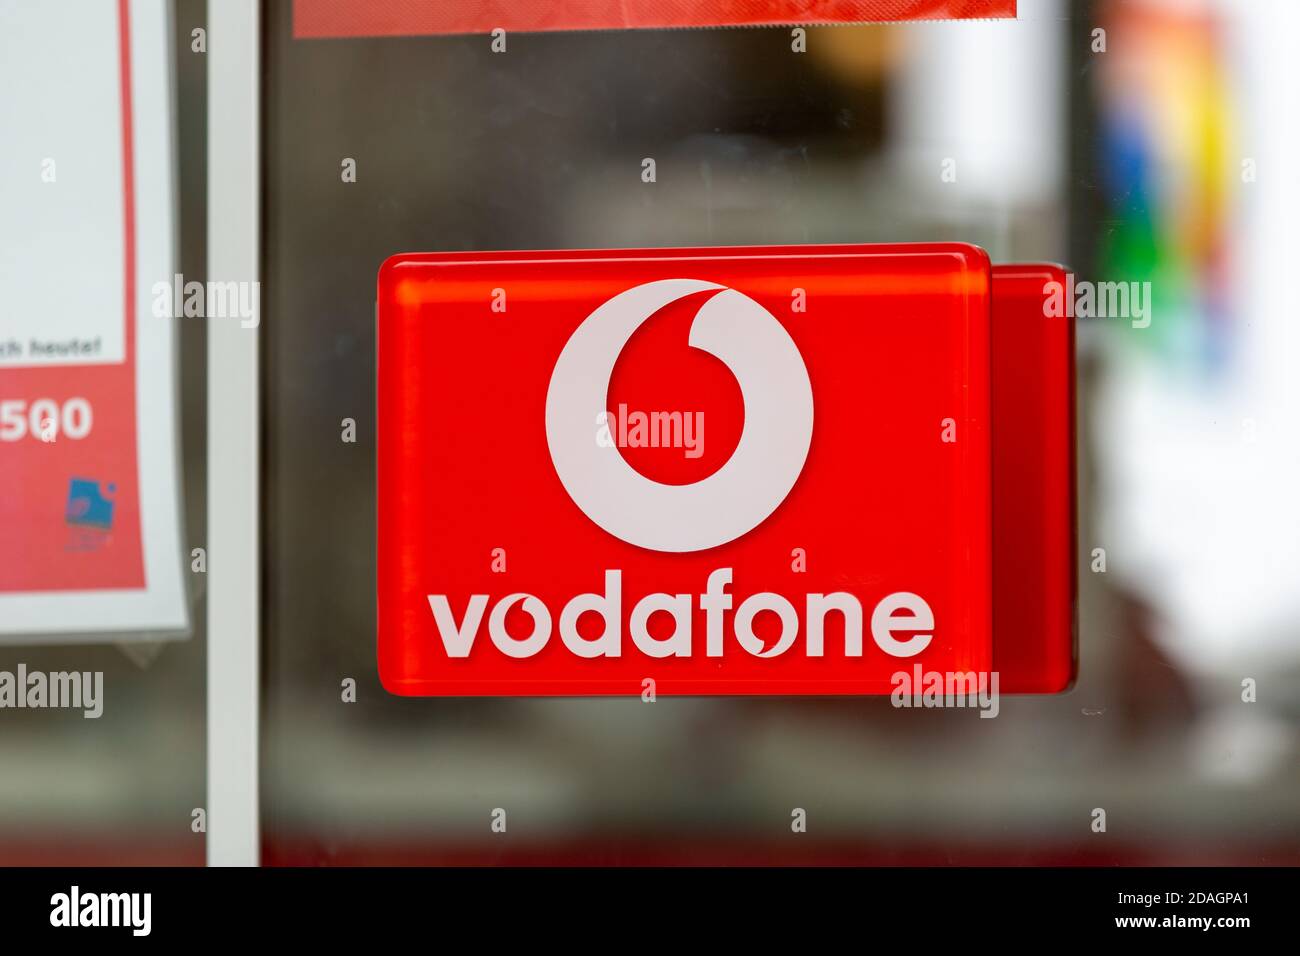 PASSAU / GERMANY - NOVEMBER 8, 2020: Branch logo of Vodafone. Vodafone GmbH is a German subsidiary of Vodafone Group plc, a company based in the UK. Stock Photo